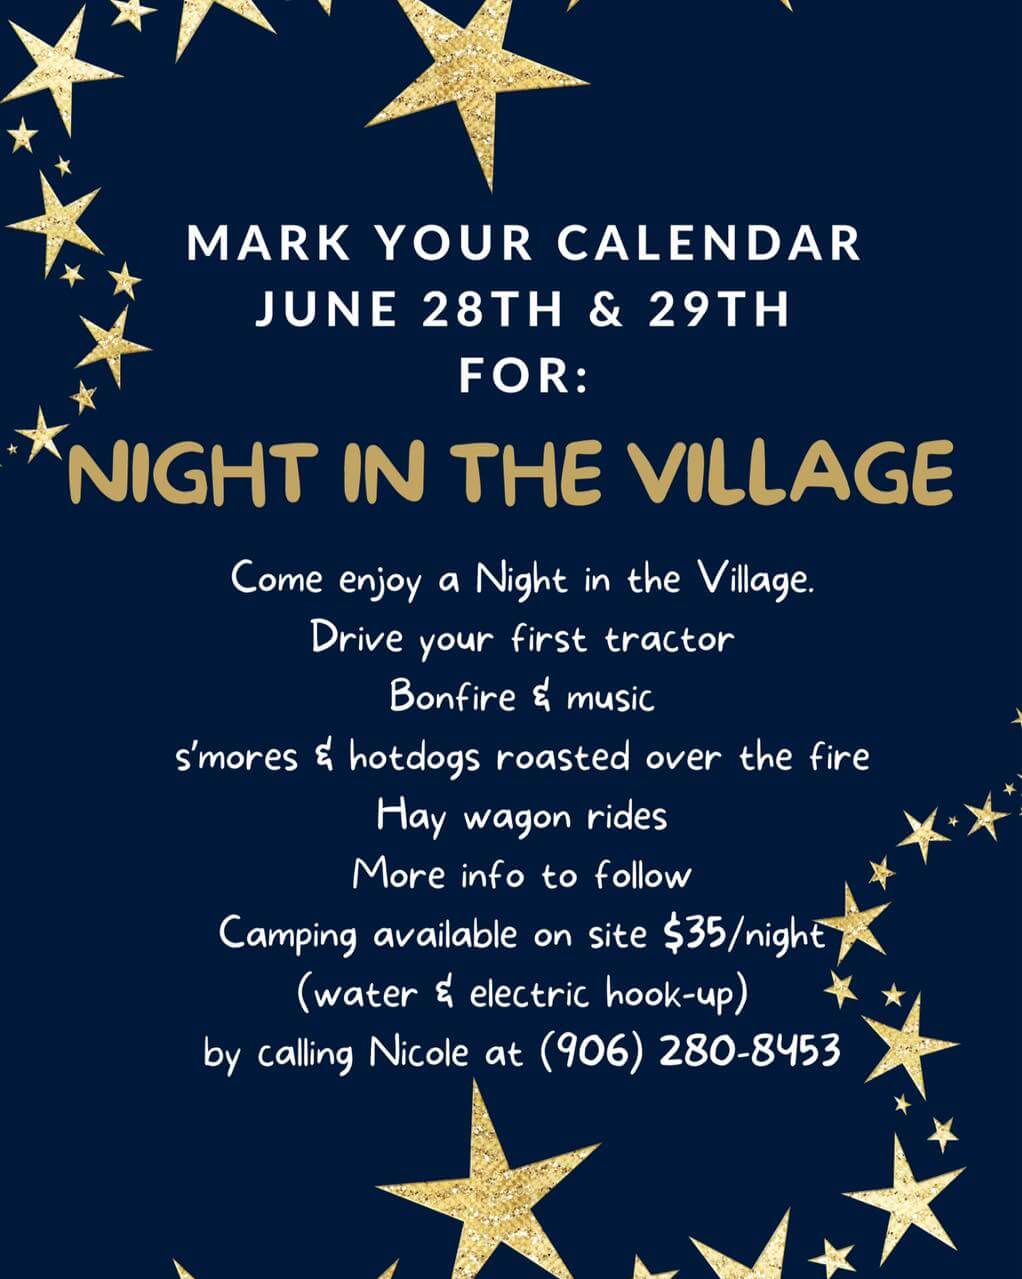 Mark Your Calendar, June 28th & 29th for: Night in the Village. Come enjoy a Night in the Village. Drive your first tractor, Bonfire & Music, S'Mores & Hot doges roasted over the fire, hay wagon rides, more info to follow. Camping available on site $35/night (water and electric hook-up) by calling Nicole at (906) 280-8453